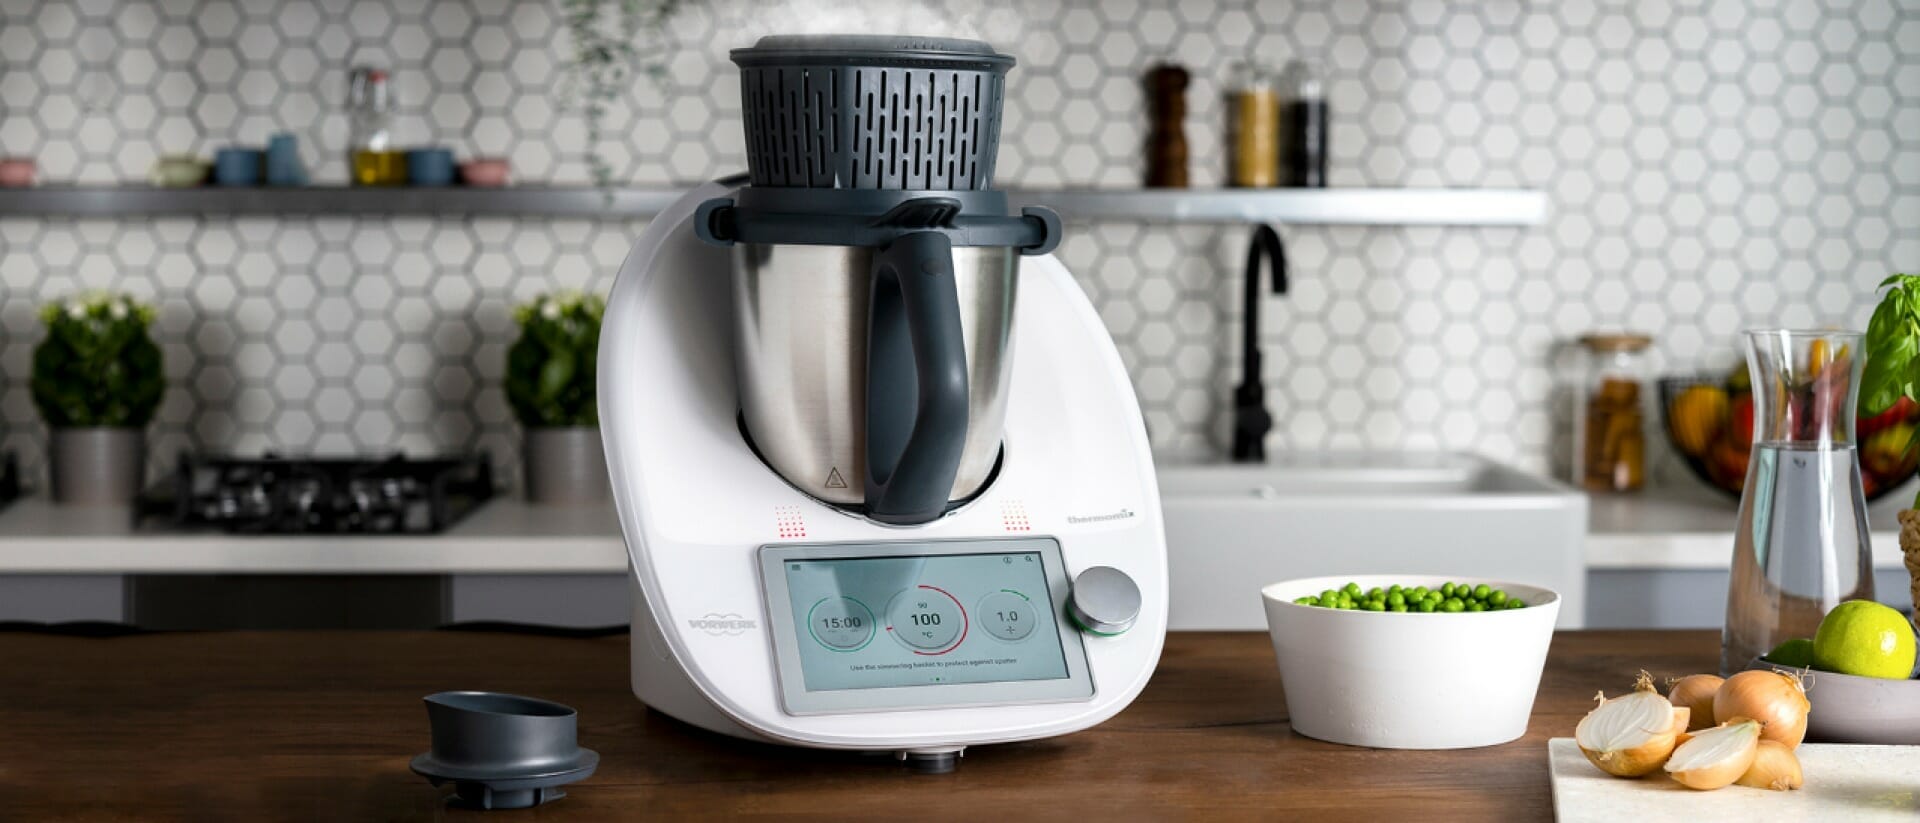 The additional safety instructions for your Thermomix® appliance